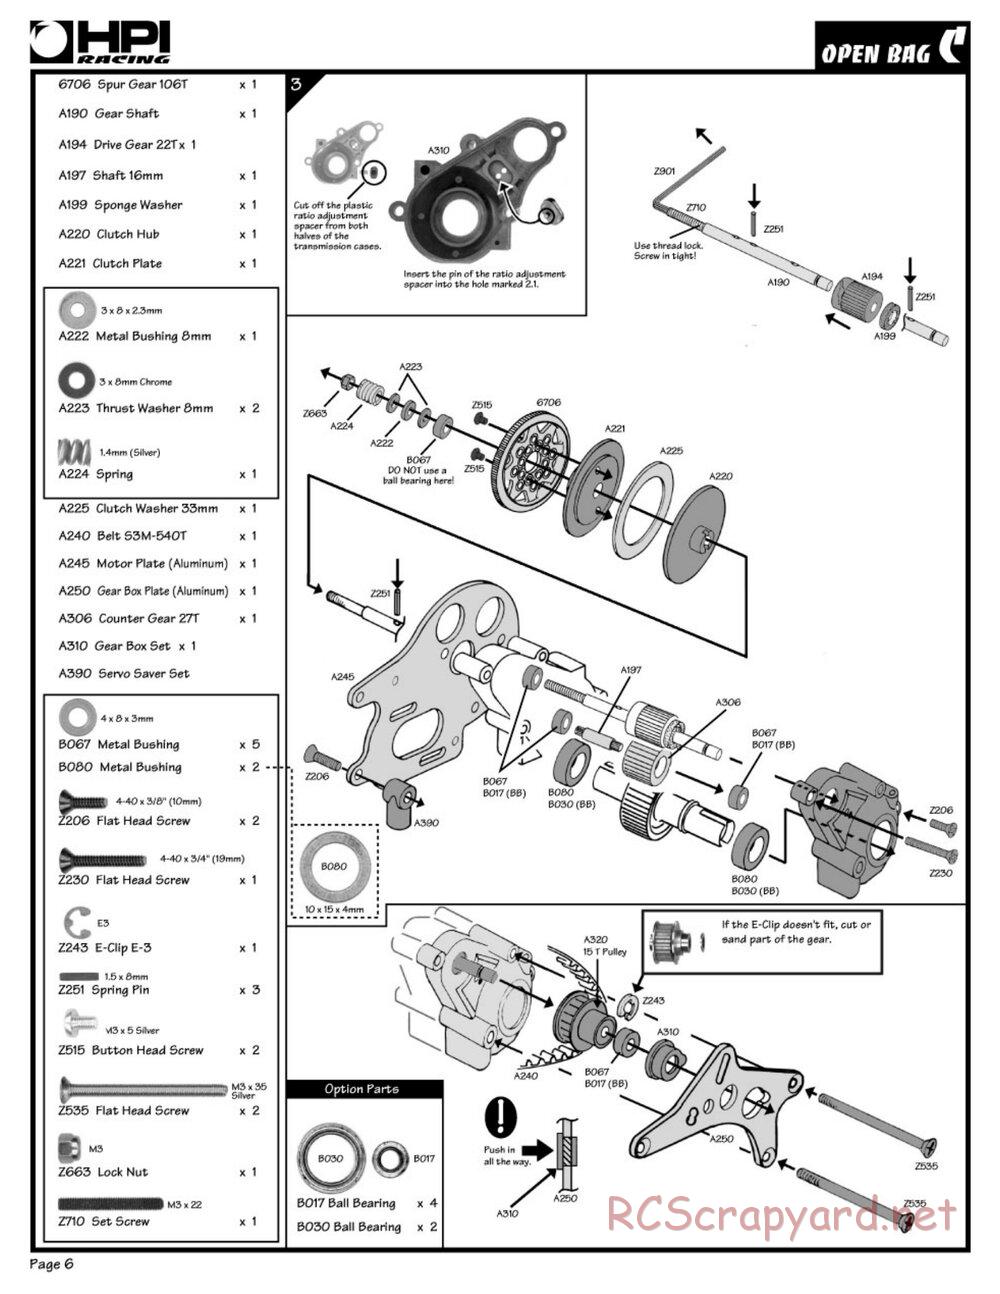 HPI - RS4 - Manual - Page 6